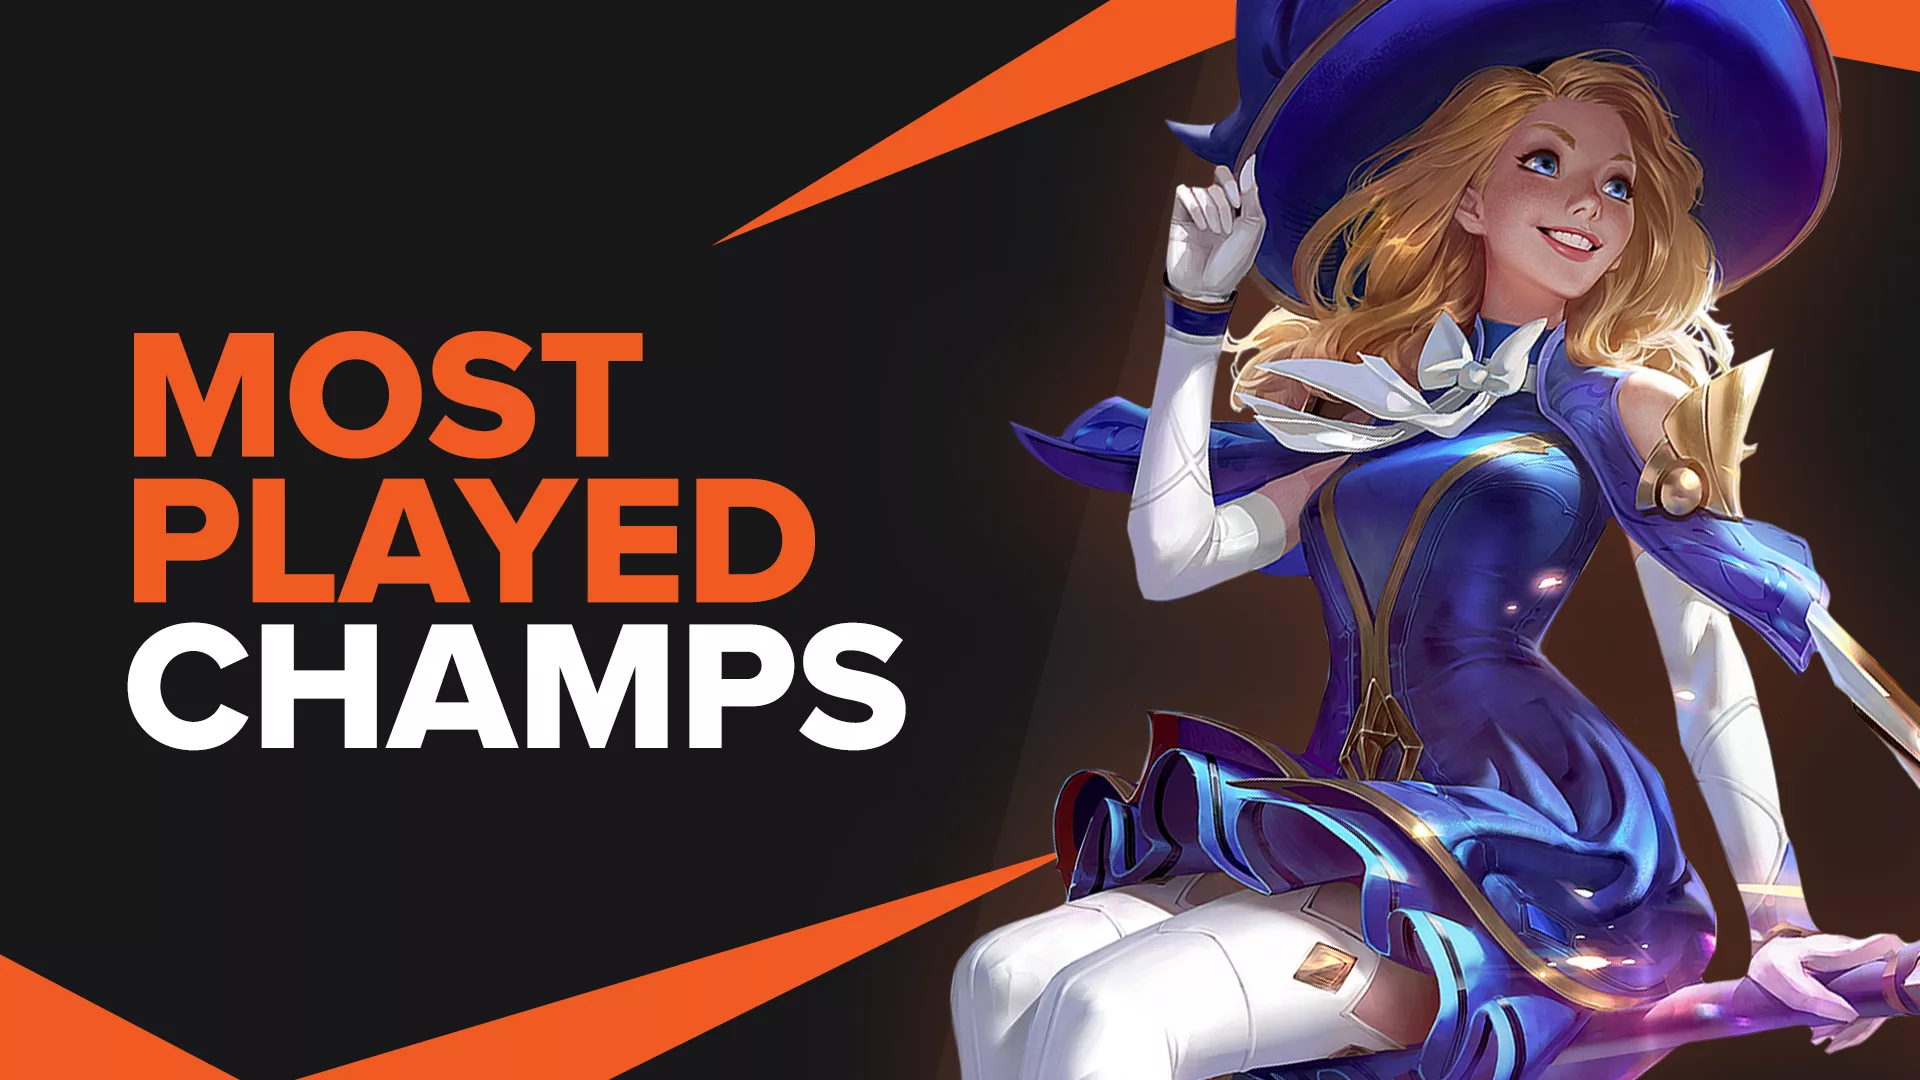 Most Played Champions in League of Legends